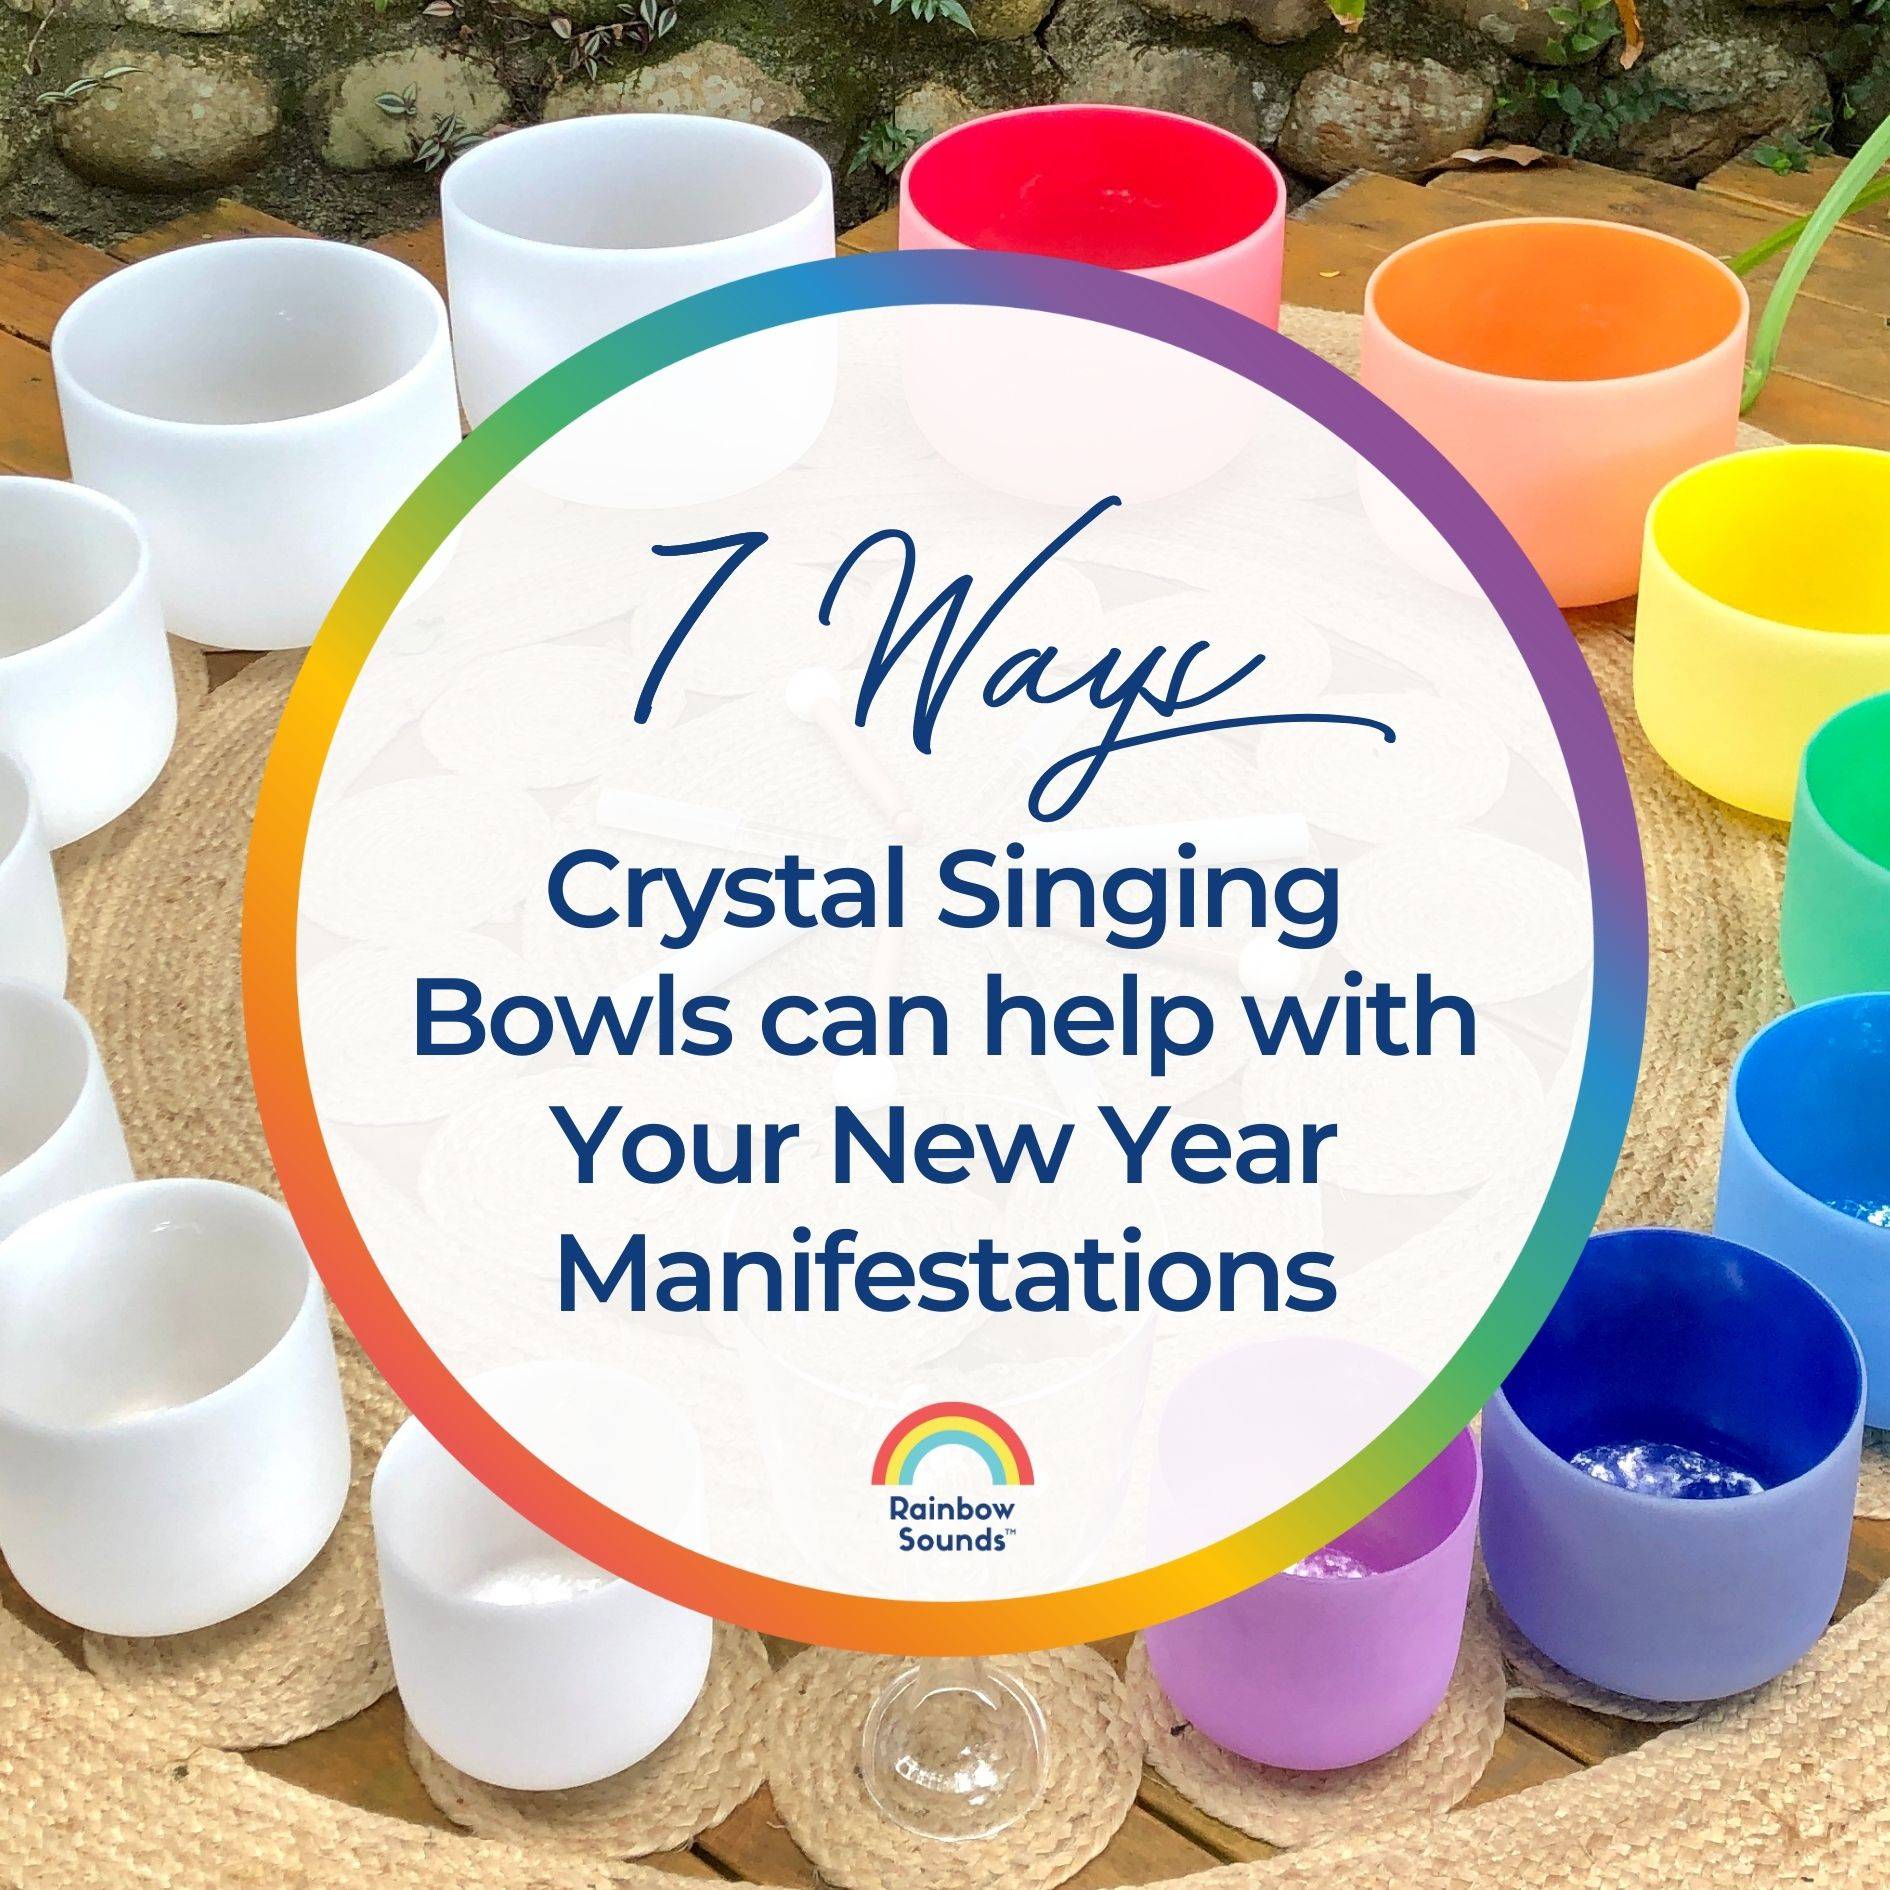 Crystal Singing Bowls help with new year manifestations